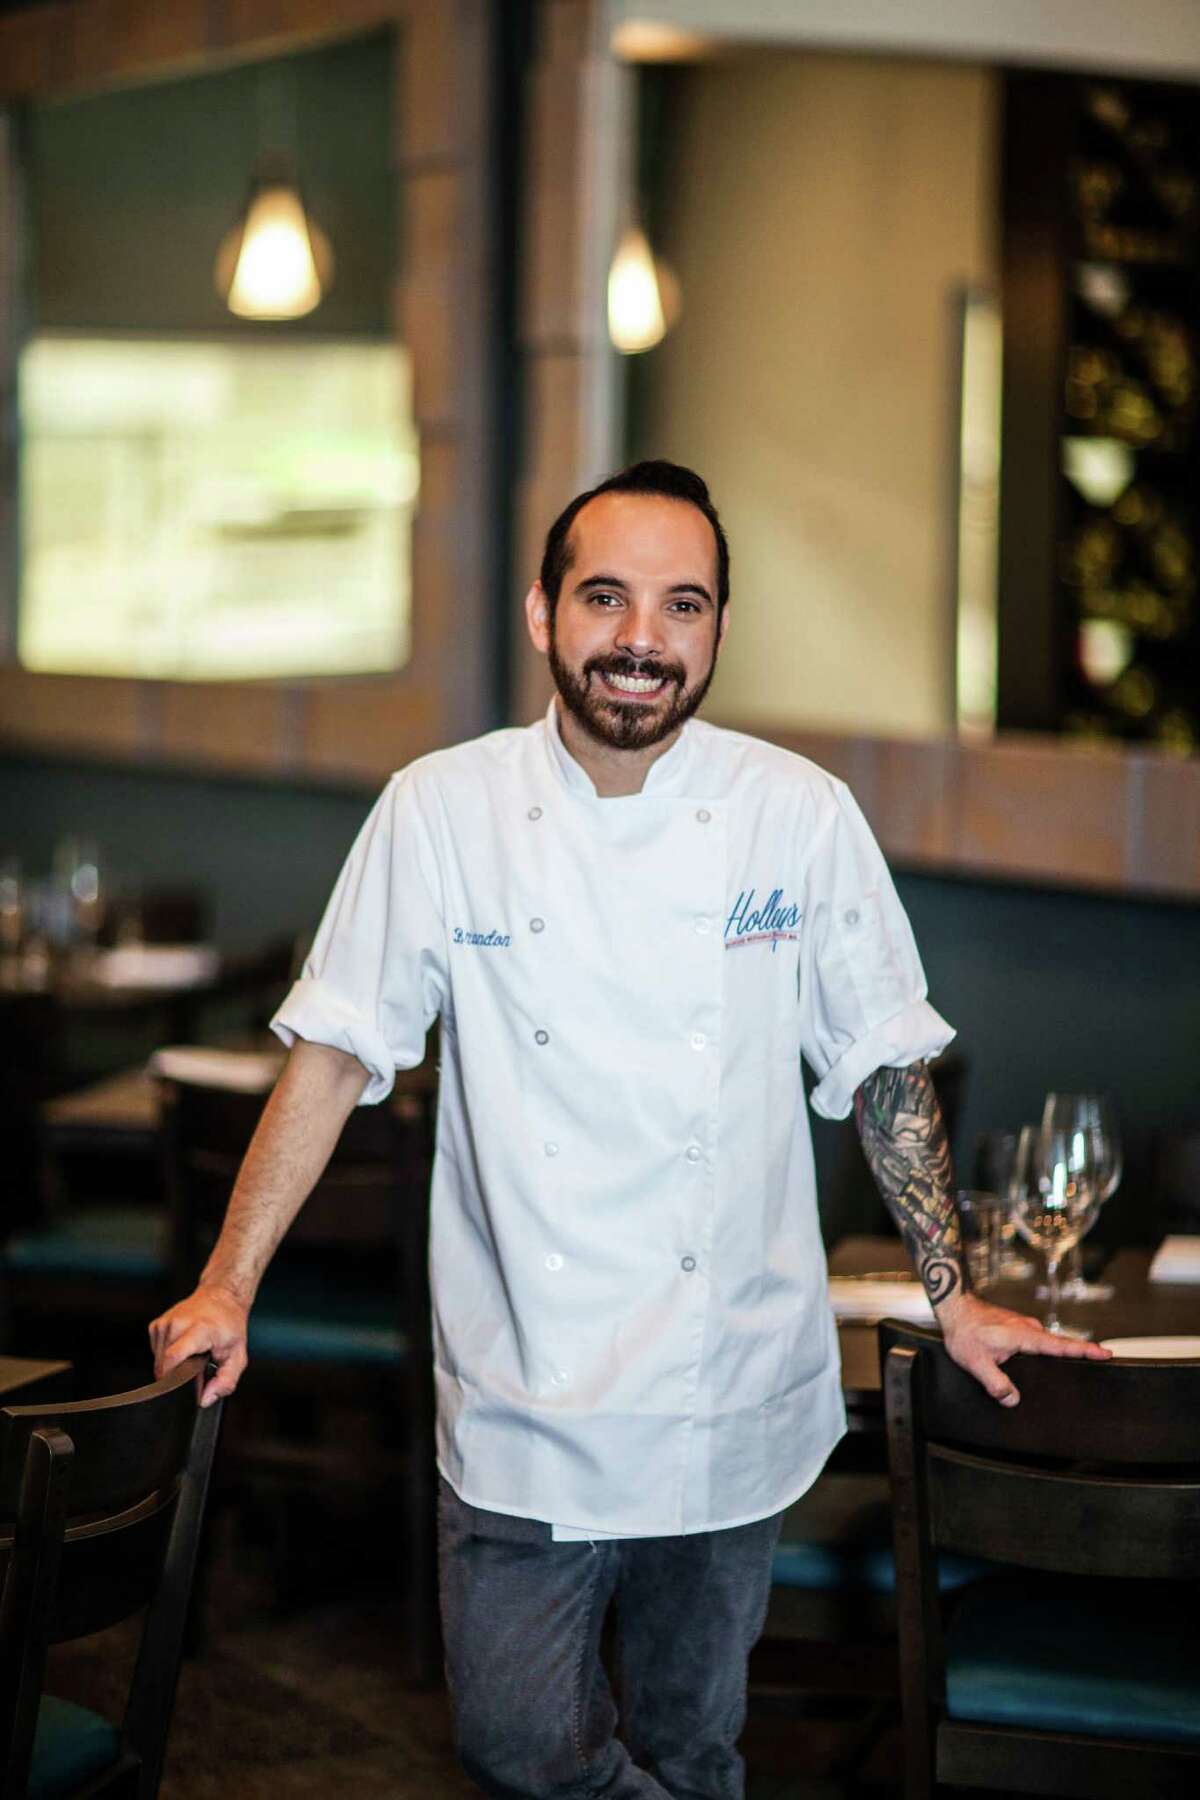 The Kirby Group has recruited Brandon Silva as their culinary director, with an eye for developing more food-centered concepts.